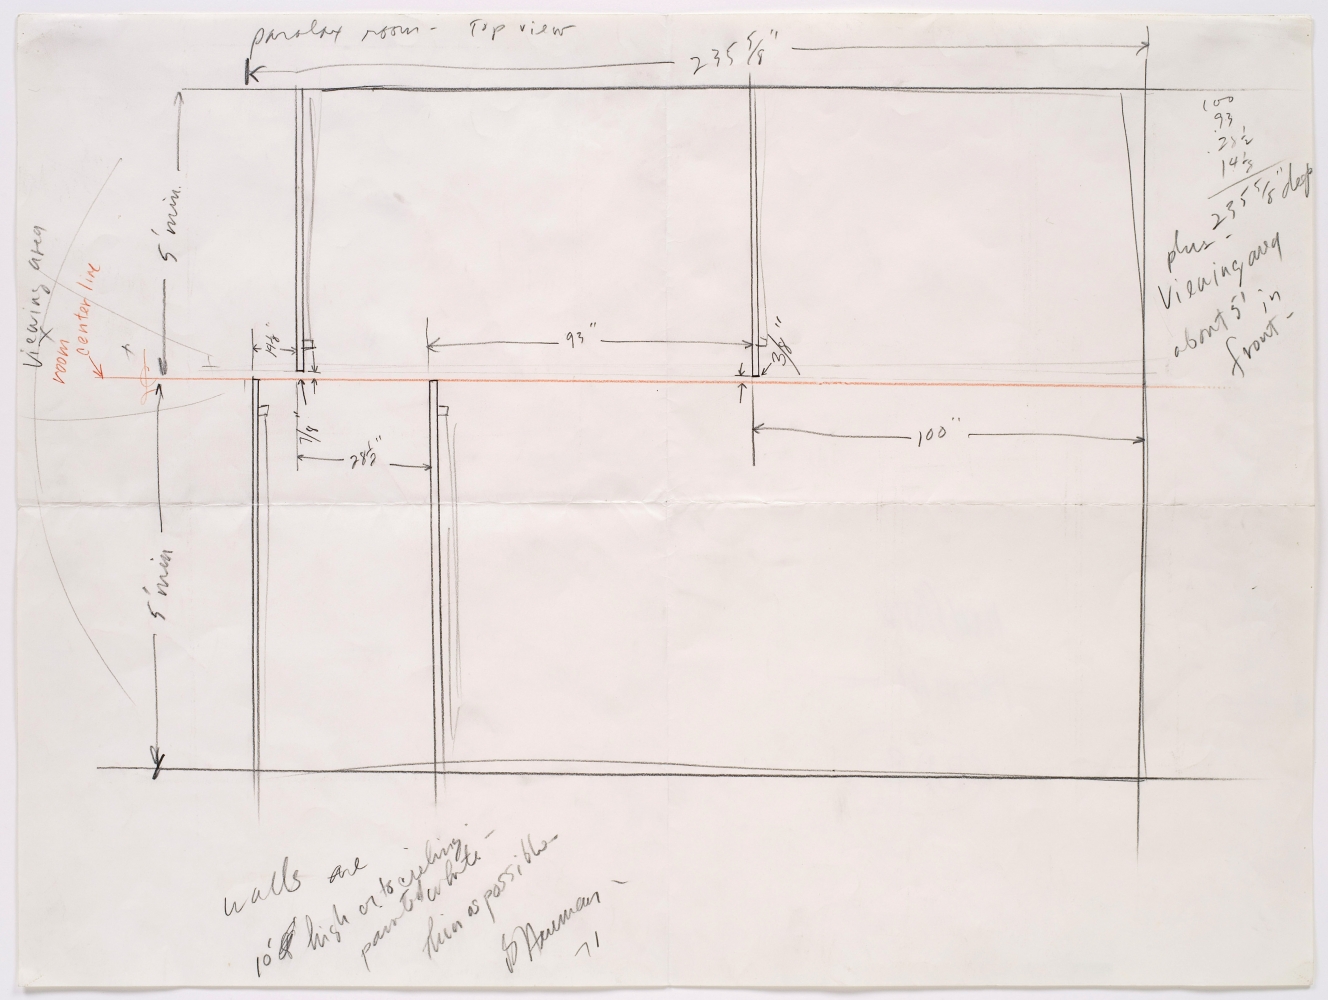 graphite and colored pencil drawing of an installation plan with handwritten notes by the artist